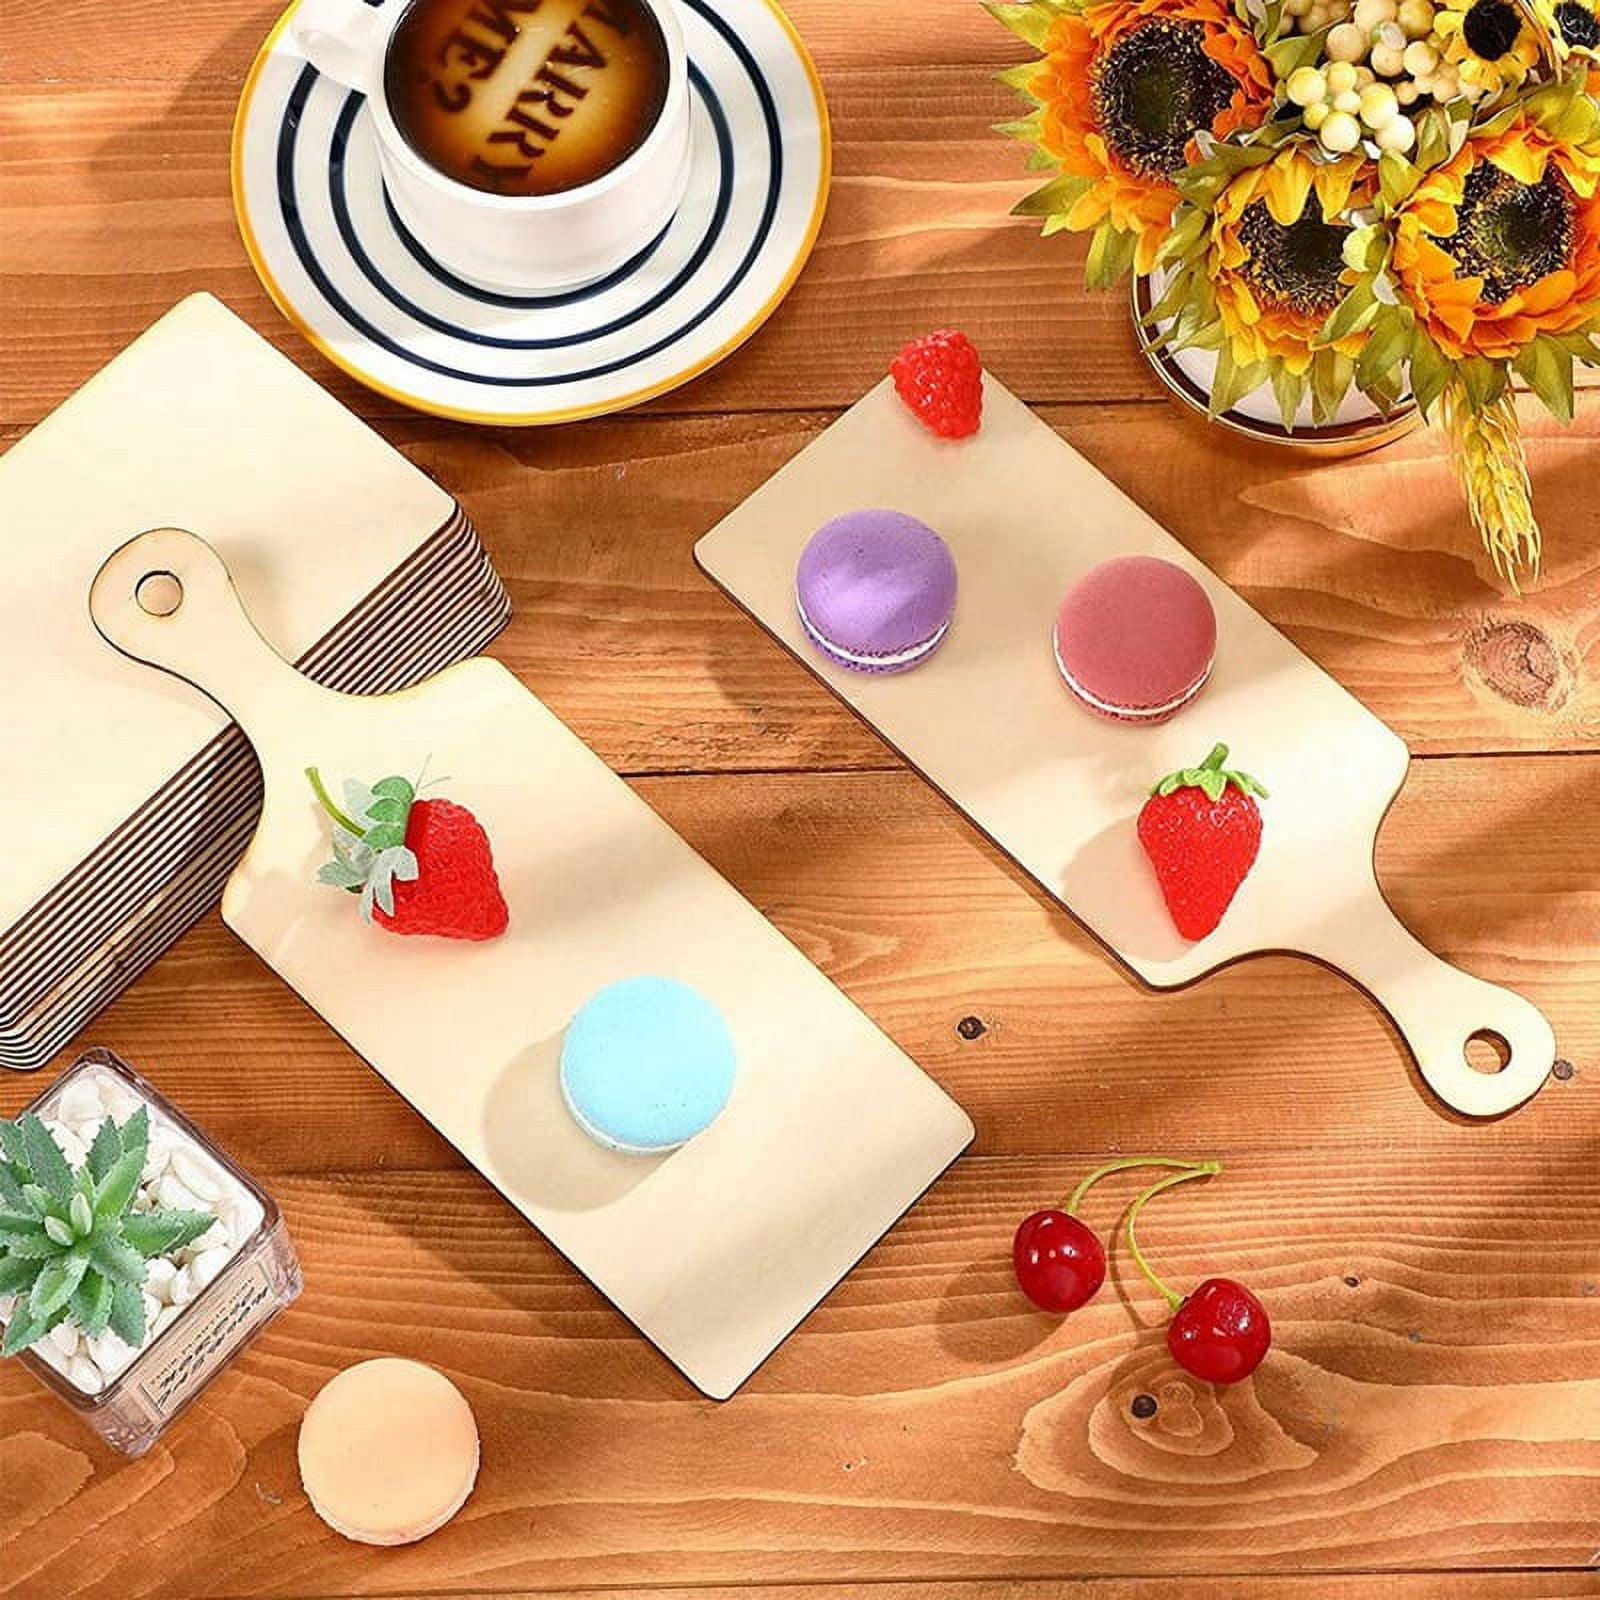 Mini Cutting Board with Handle, Resesse